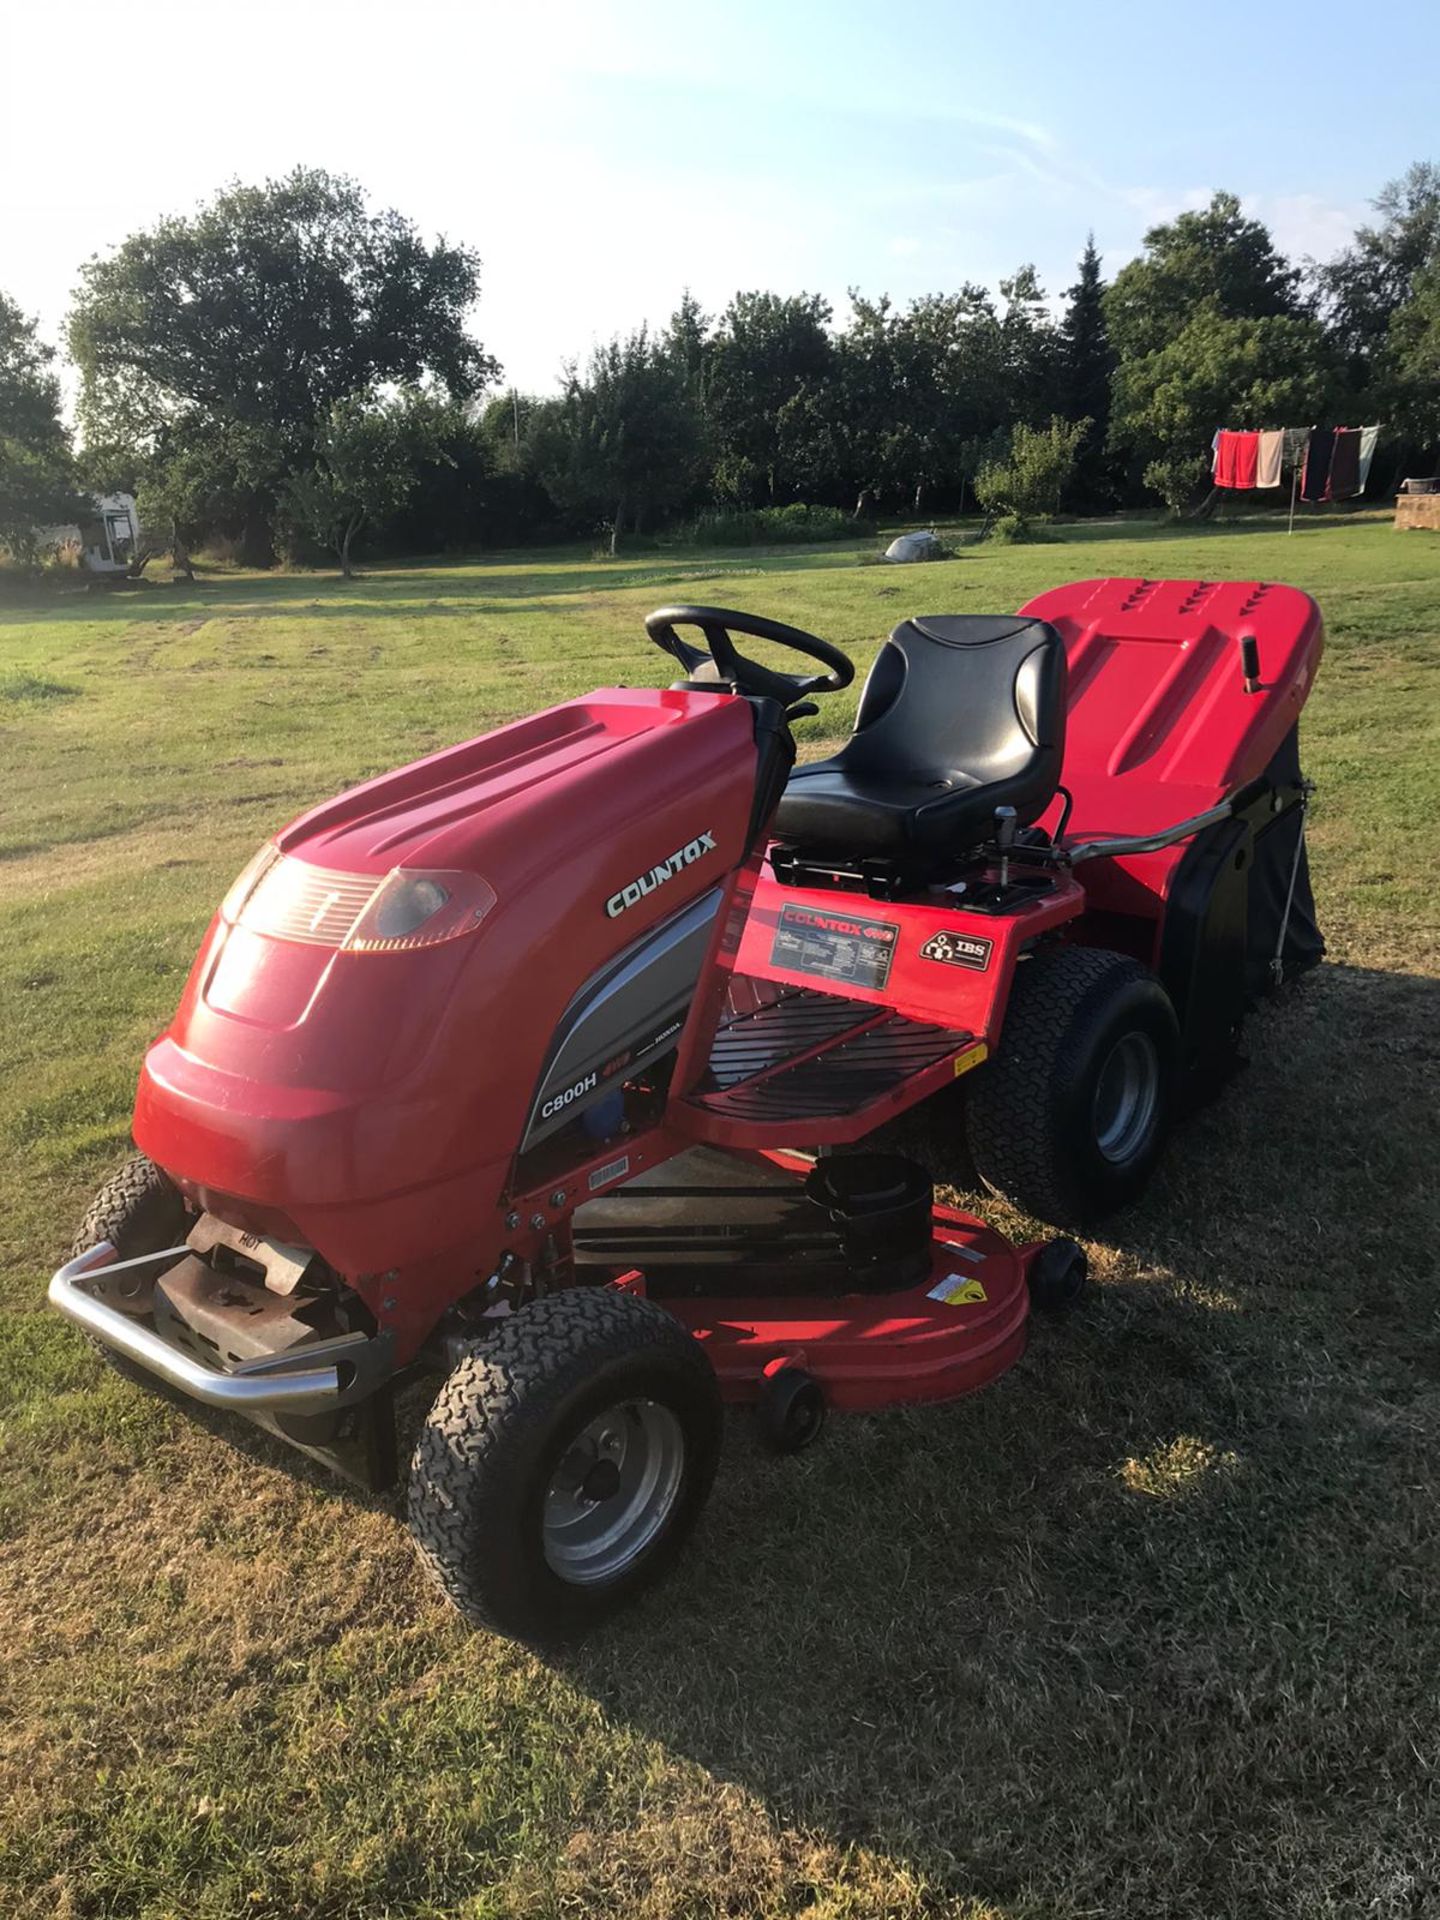 COUNTAX C800H 4WD RIDE ON LAWN MOWER, RUNS, DRIVES AND CUTS, CLEAN MACHINE, GREAT CONDITION - Image 2 of 6